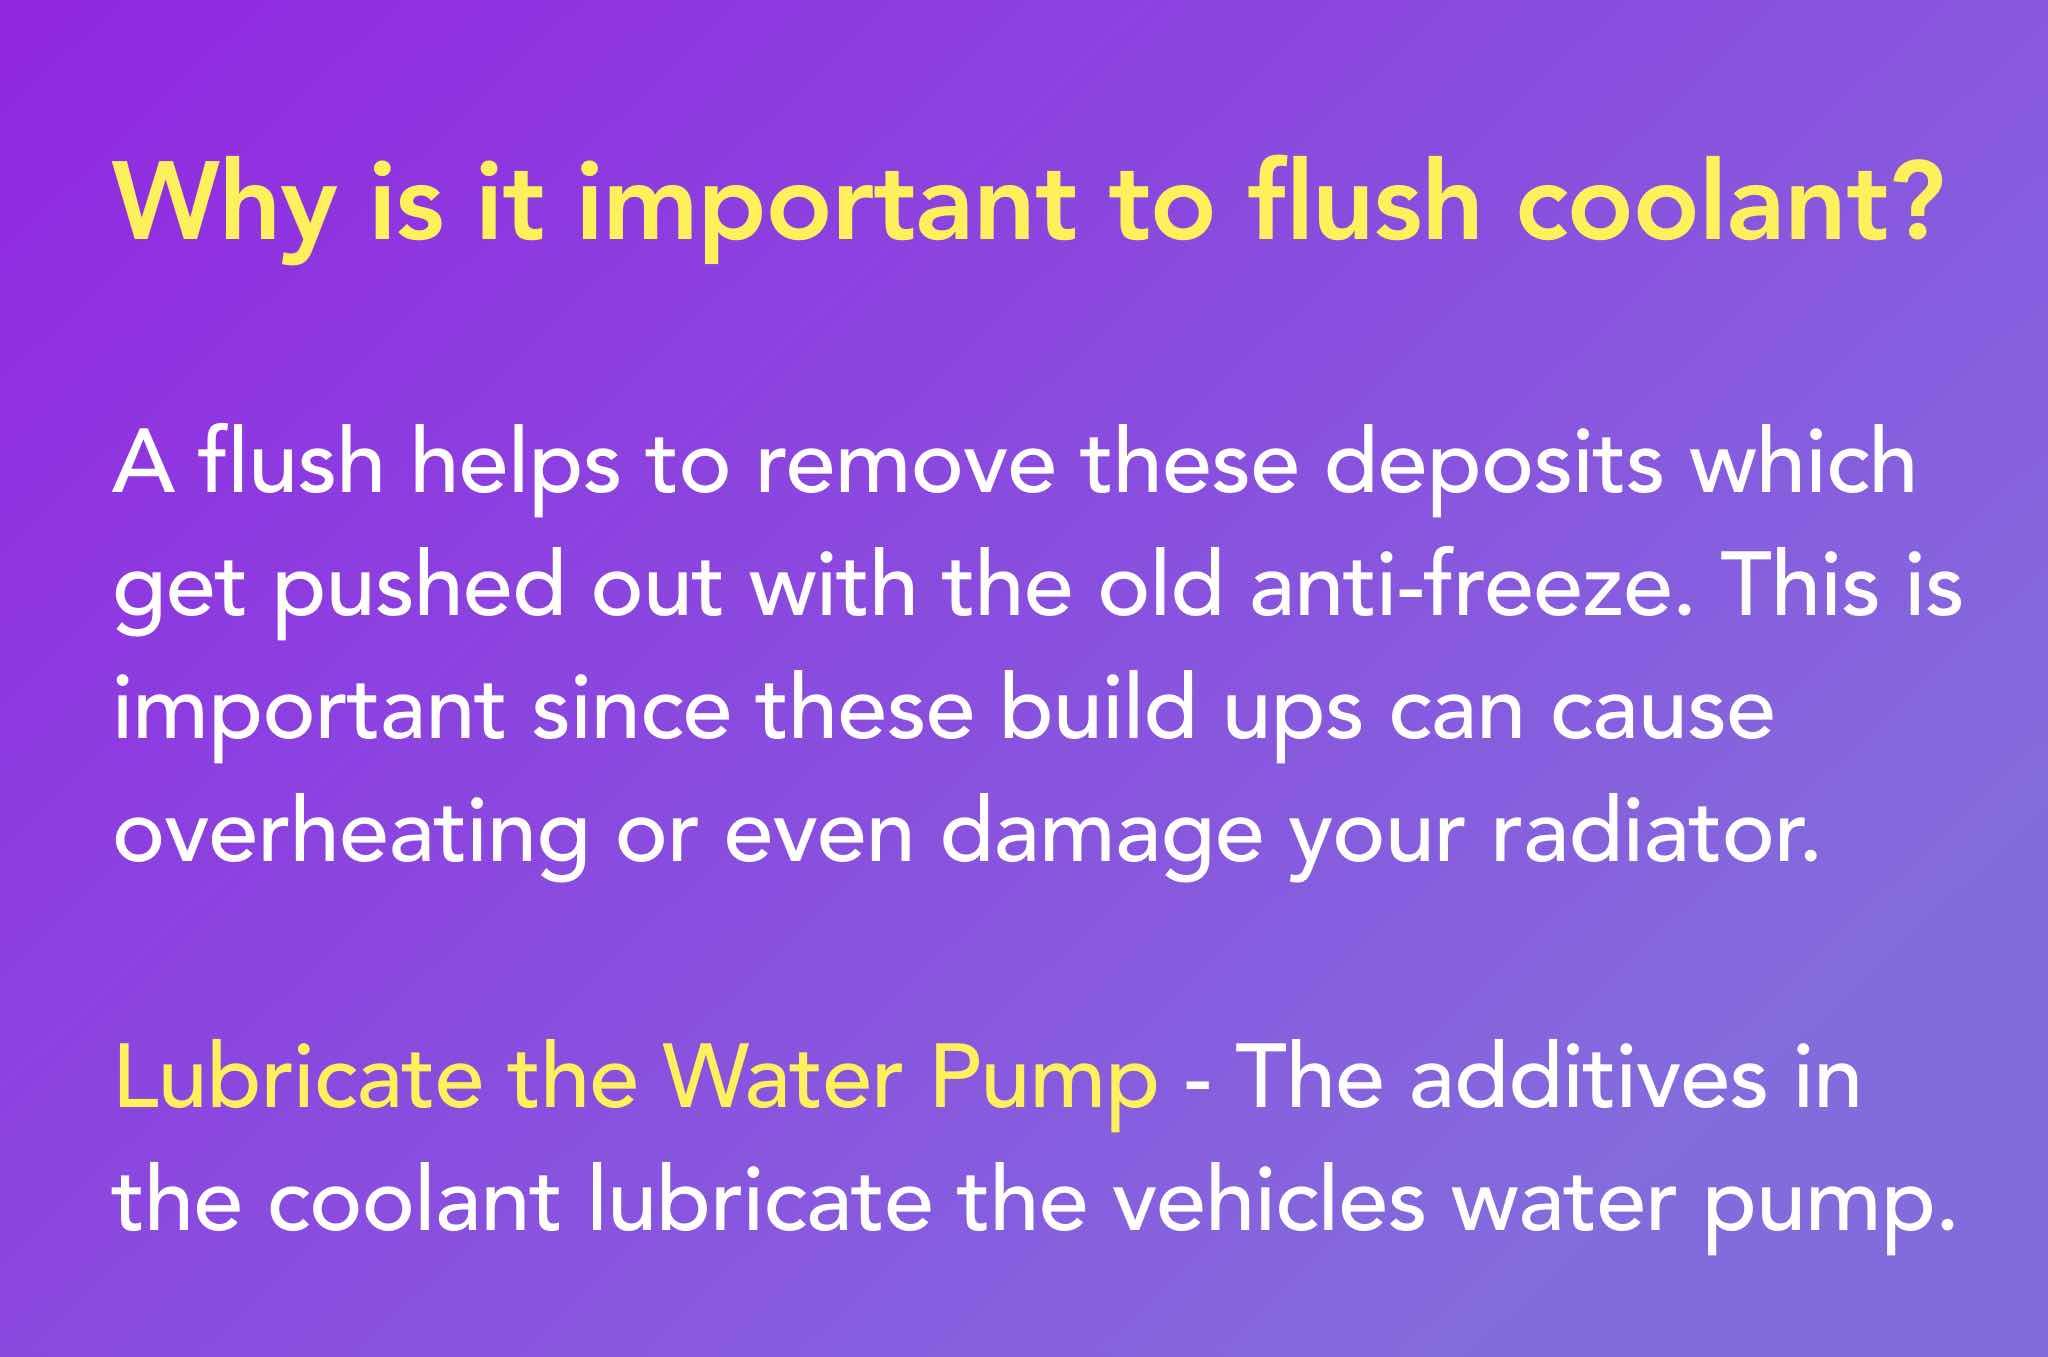 A flush helps to remove these deposits which get pushed out with the old anti-freeze. This is important since these build ups can cause overheating or even damage your radiator. Lubricate the Water Pump - The additives in the coolant lubricate the vehicles water pump.